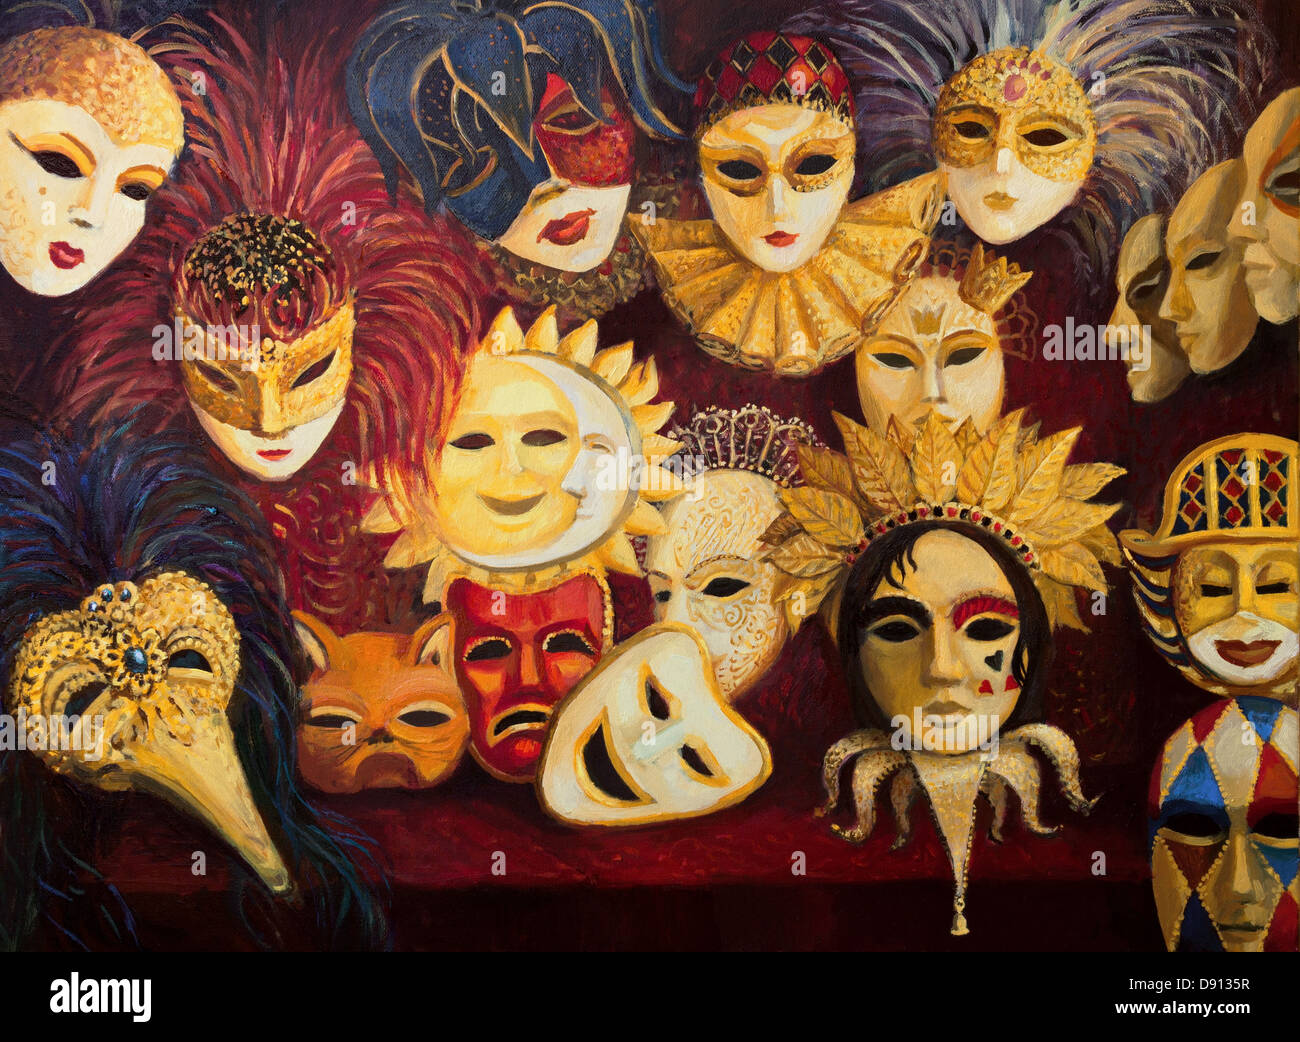 An oil painting on canvas of a colorful ornate traditional venetian masks on display, over a dark red curtain. Stock Photo